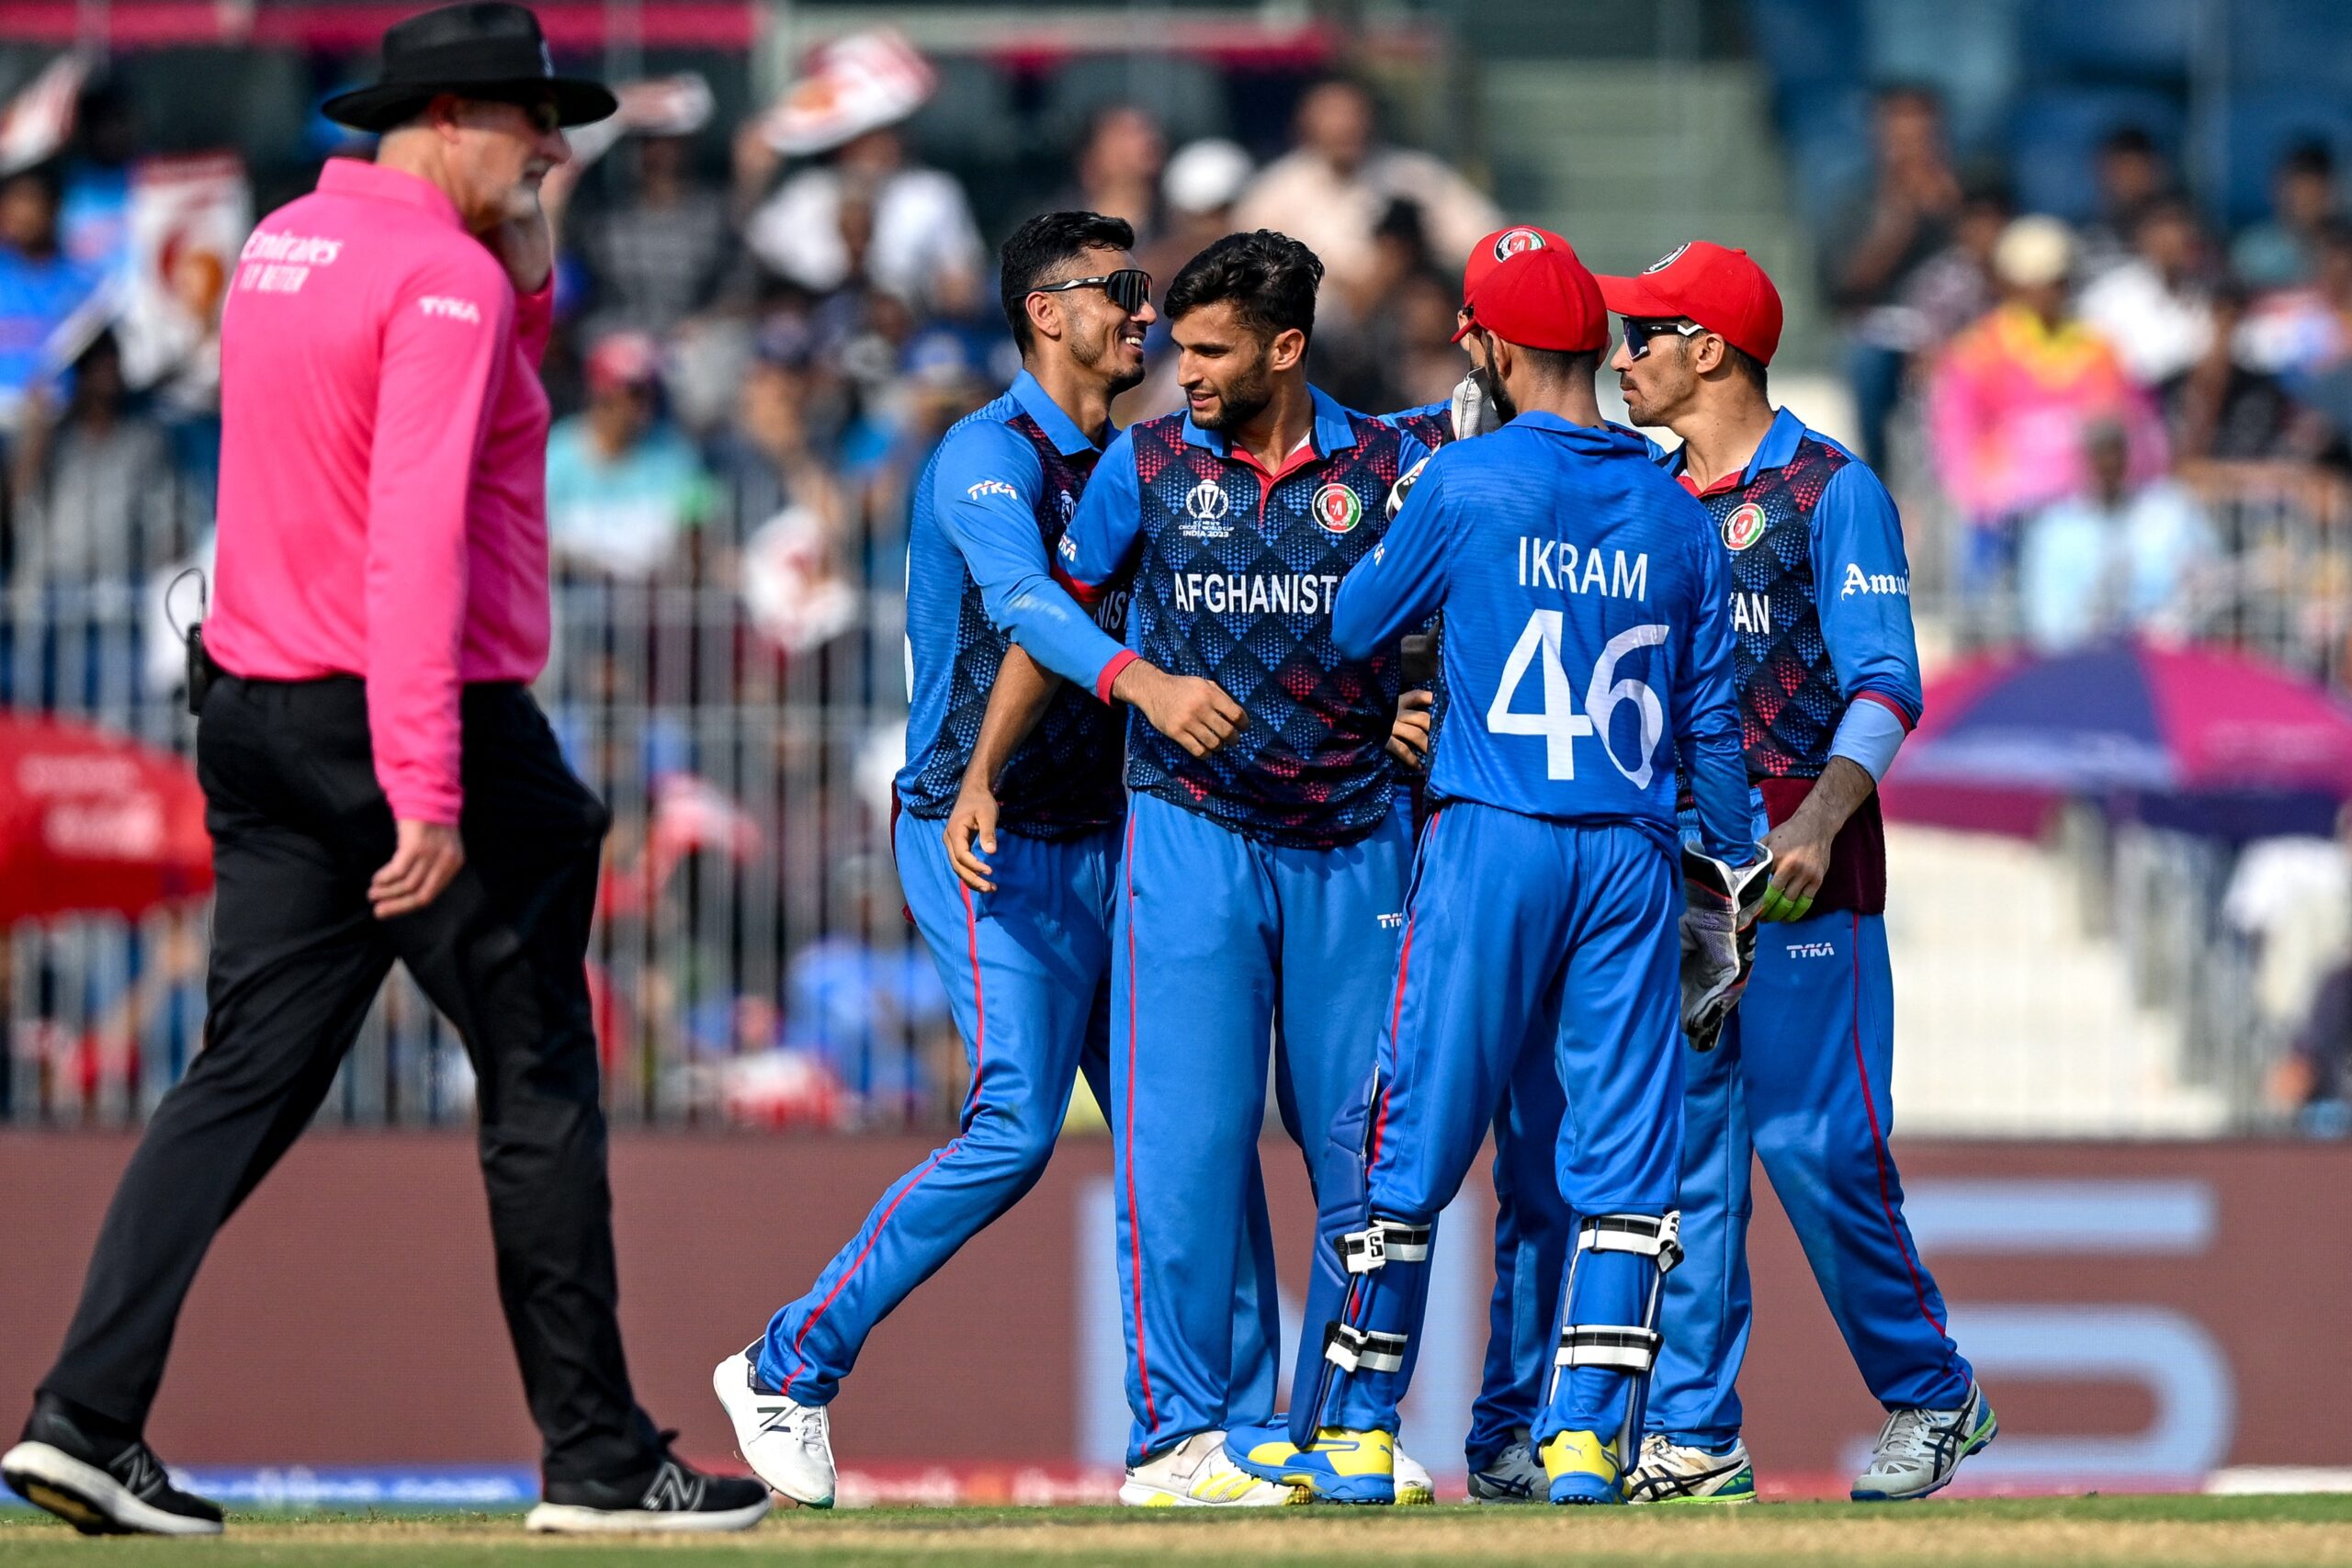 Afghanistan Thrashing Pakistan In Cricket World Cup “Not An Upset”: Ex-India Star’s Bold Claim